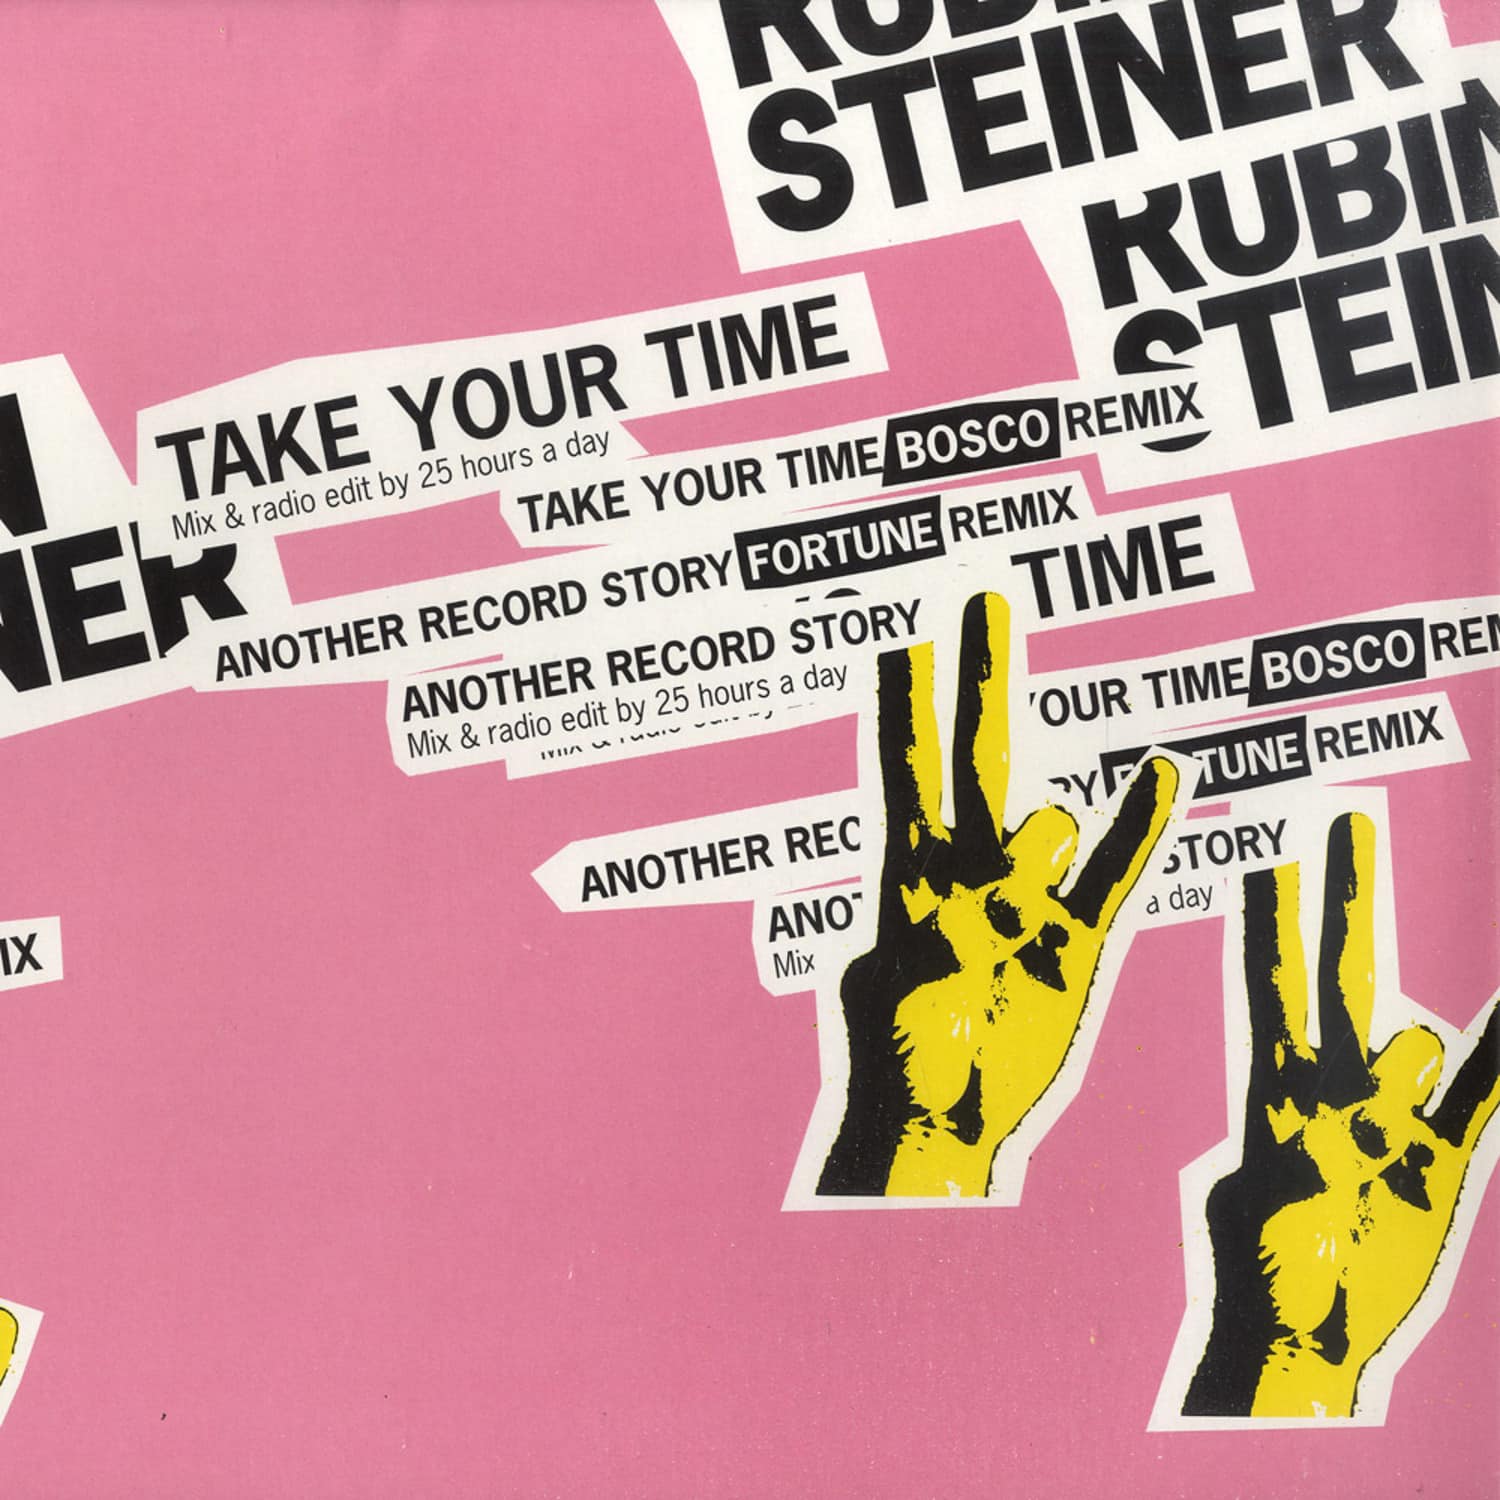 Rubin Steiner - TAKE YOUR TIME EP